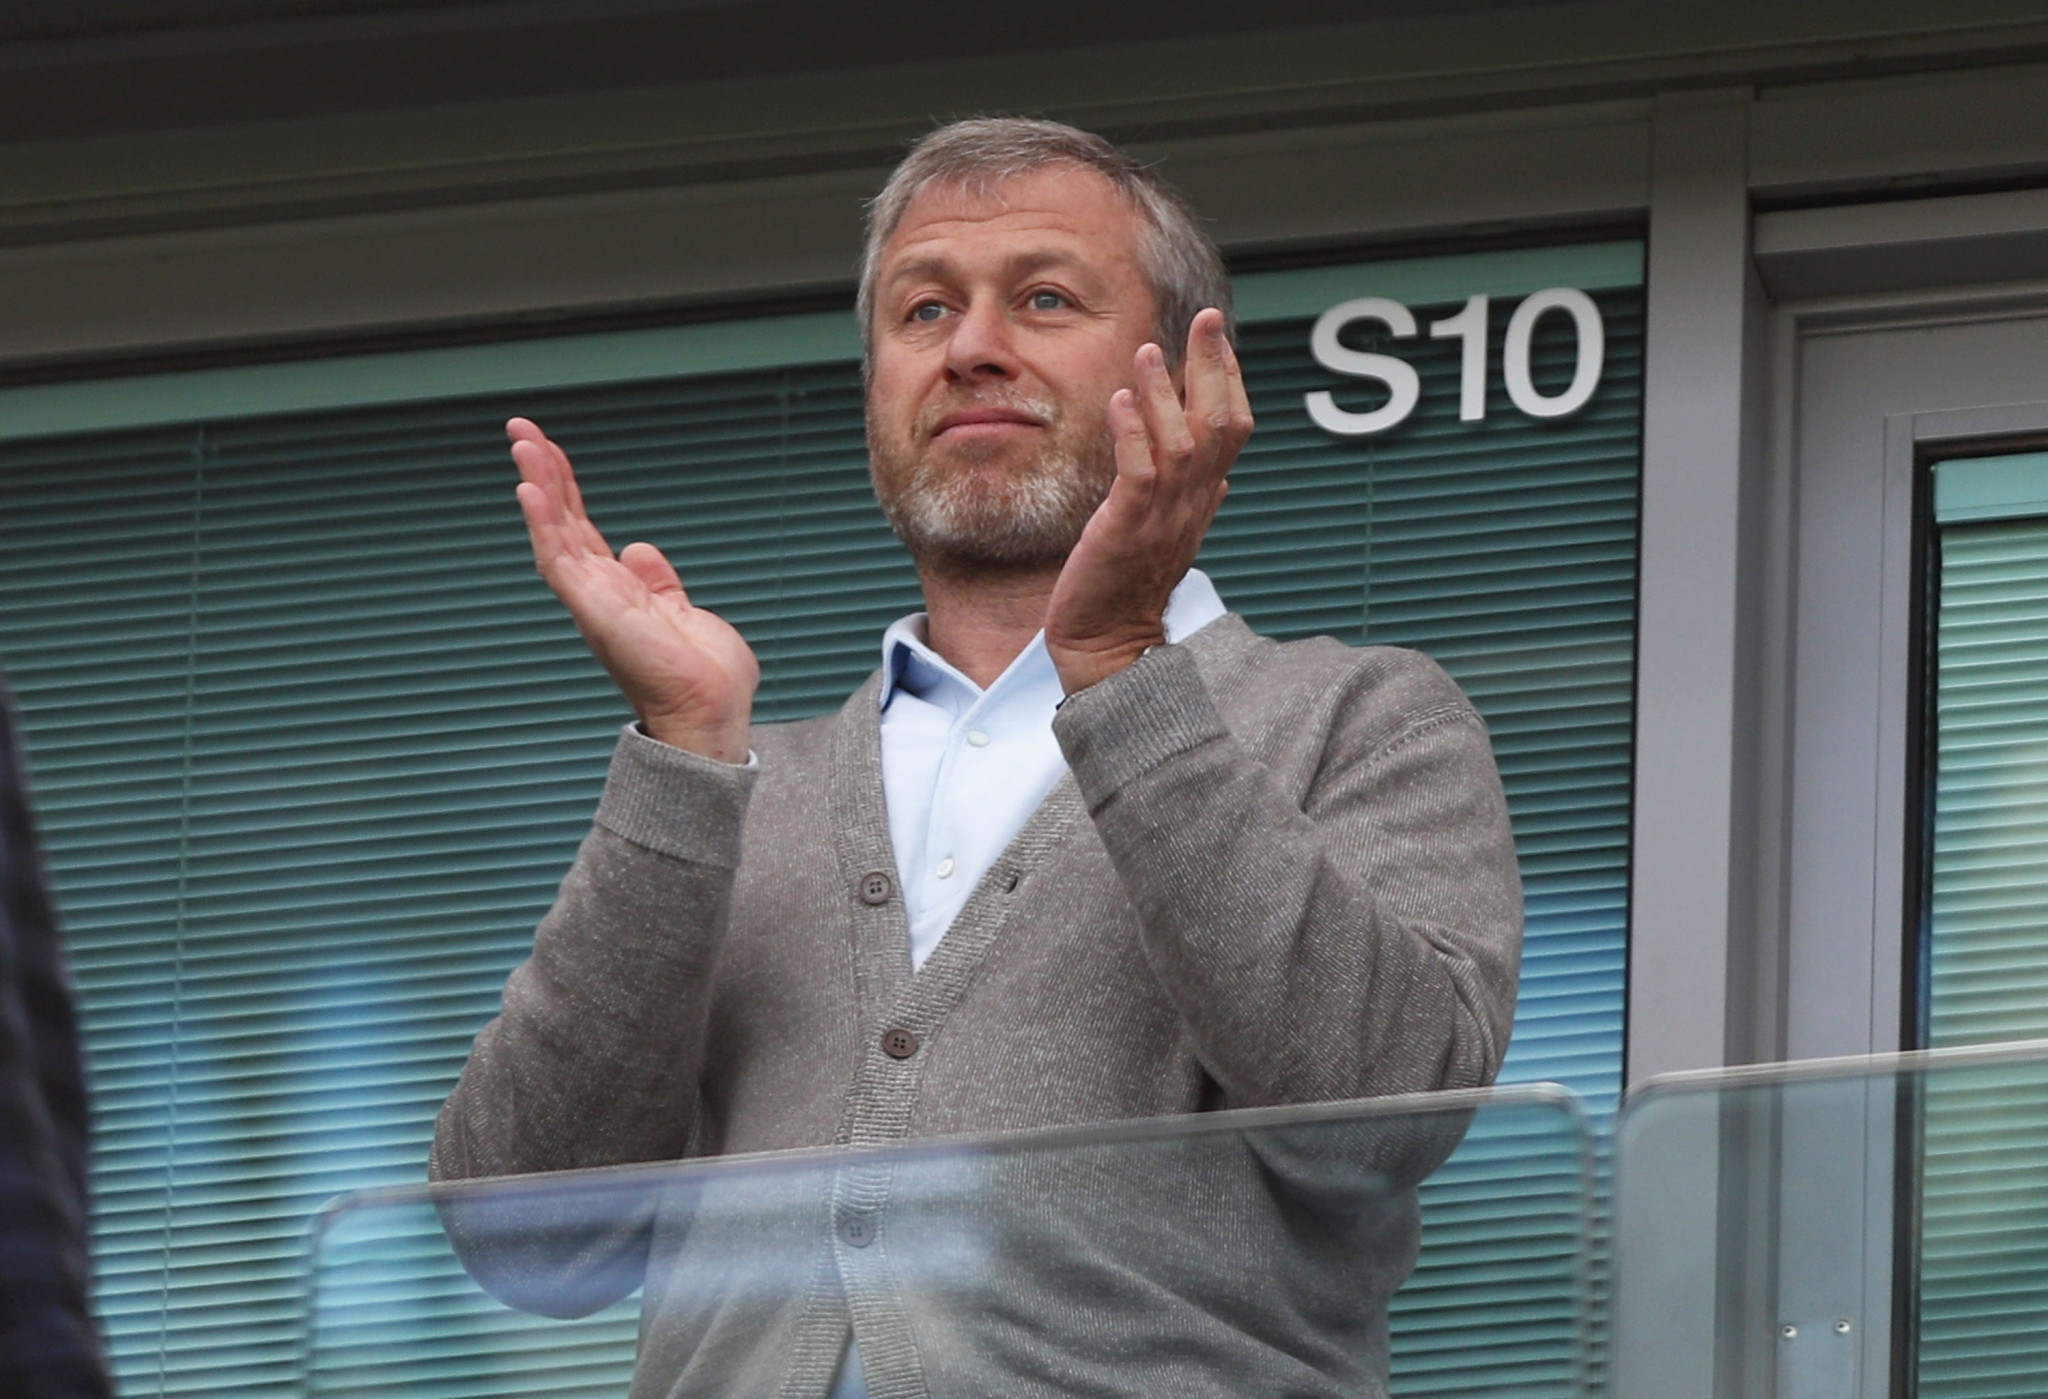 Ukraine war victims to benefit from £2.3 billion after Abramovich’s Chelsea sale